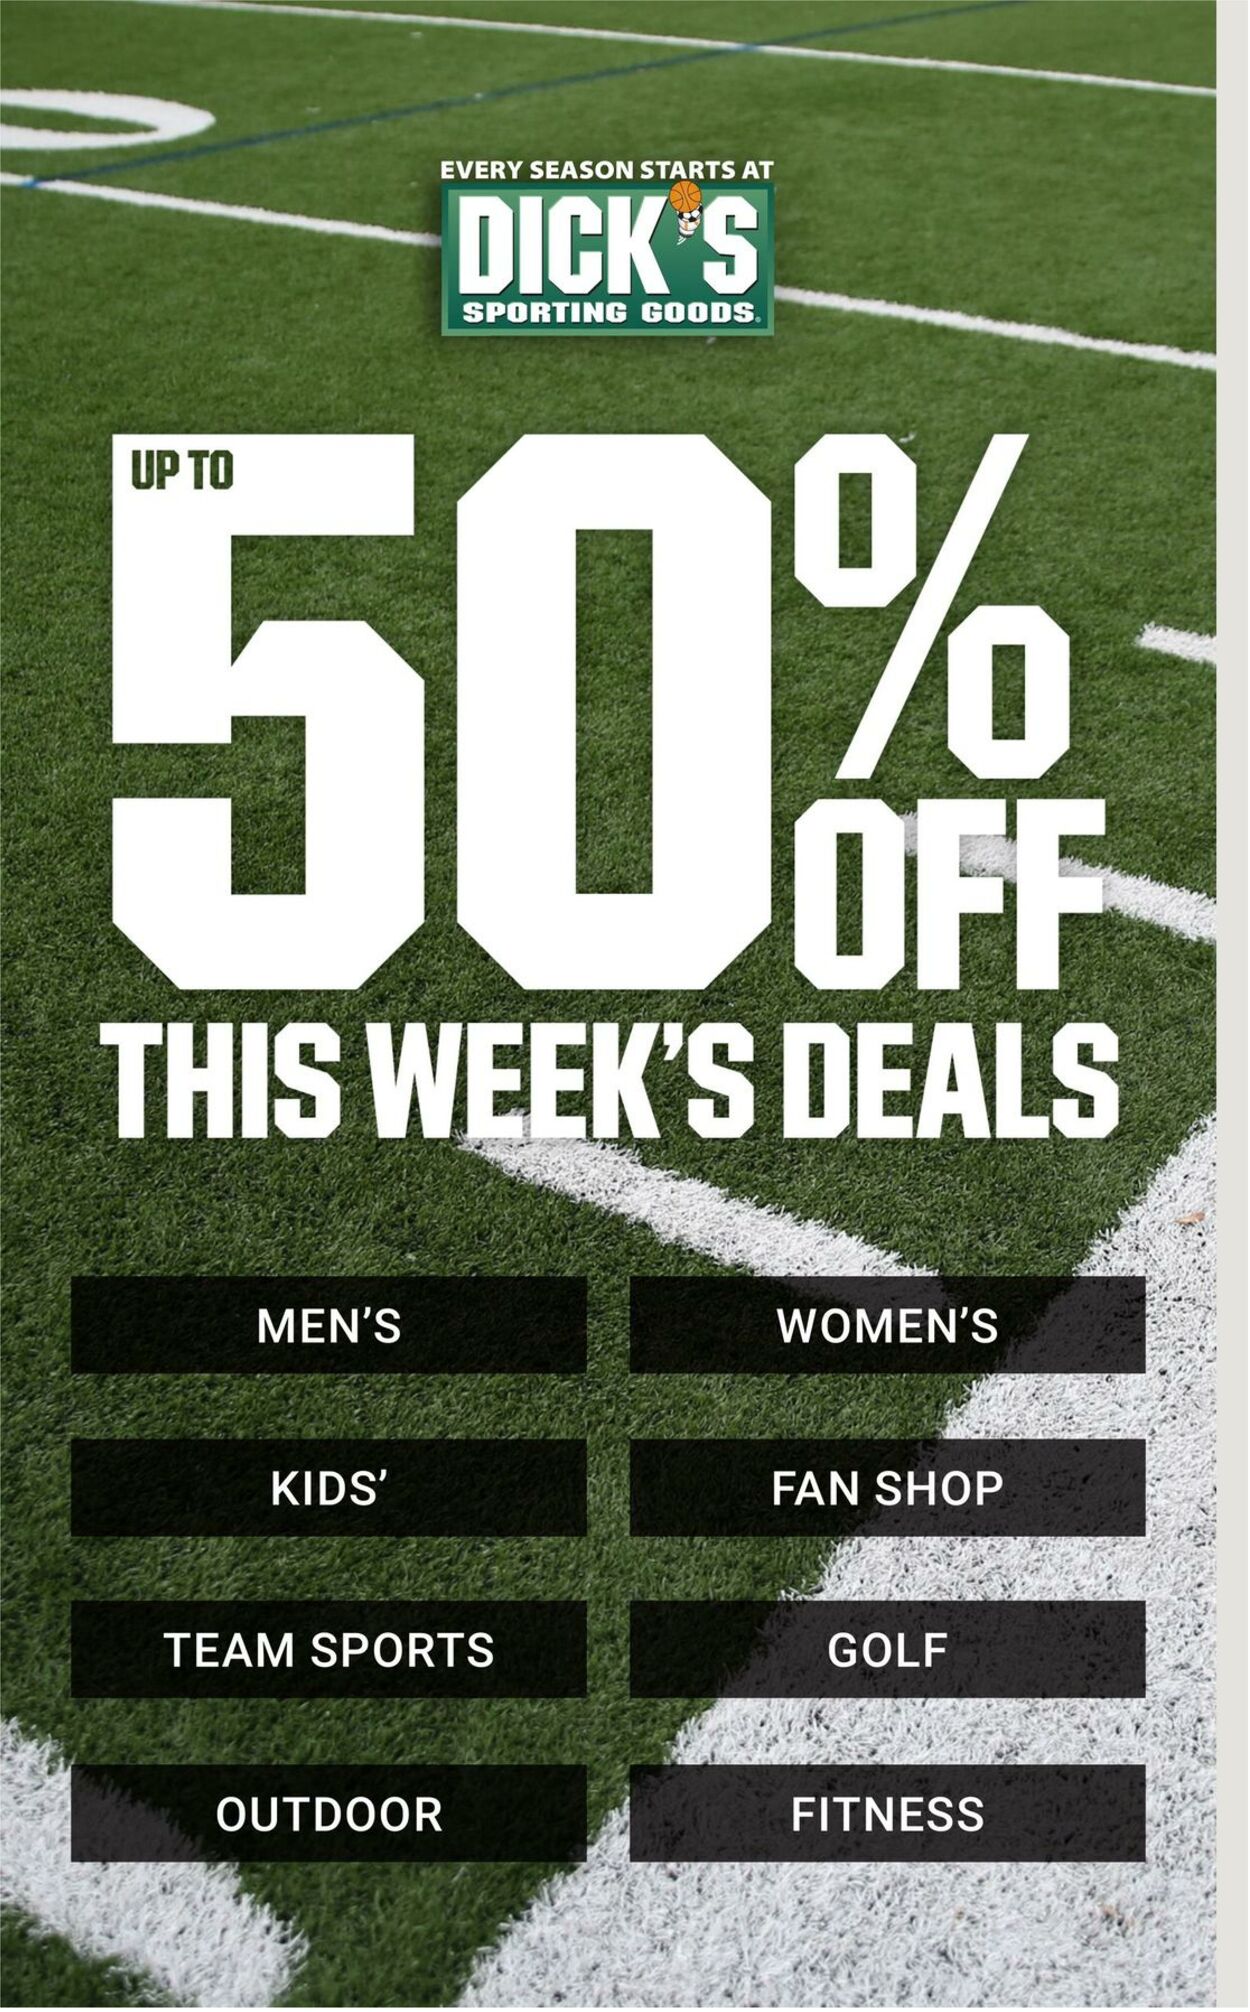 Dick's Sporting Goods Promotional weekly ads